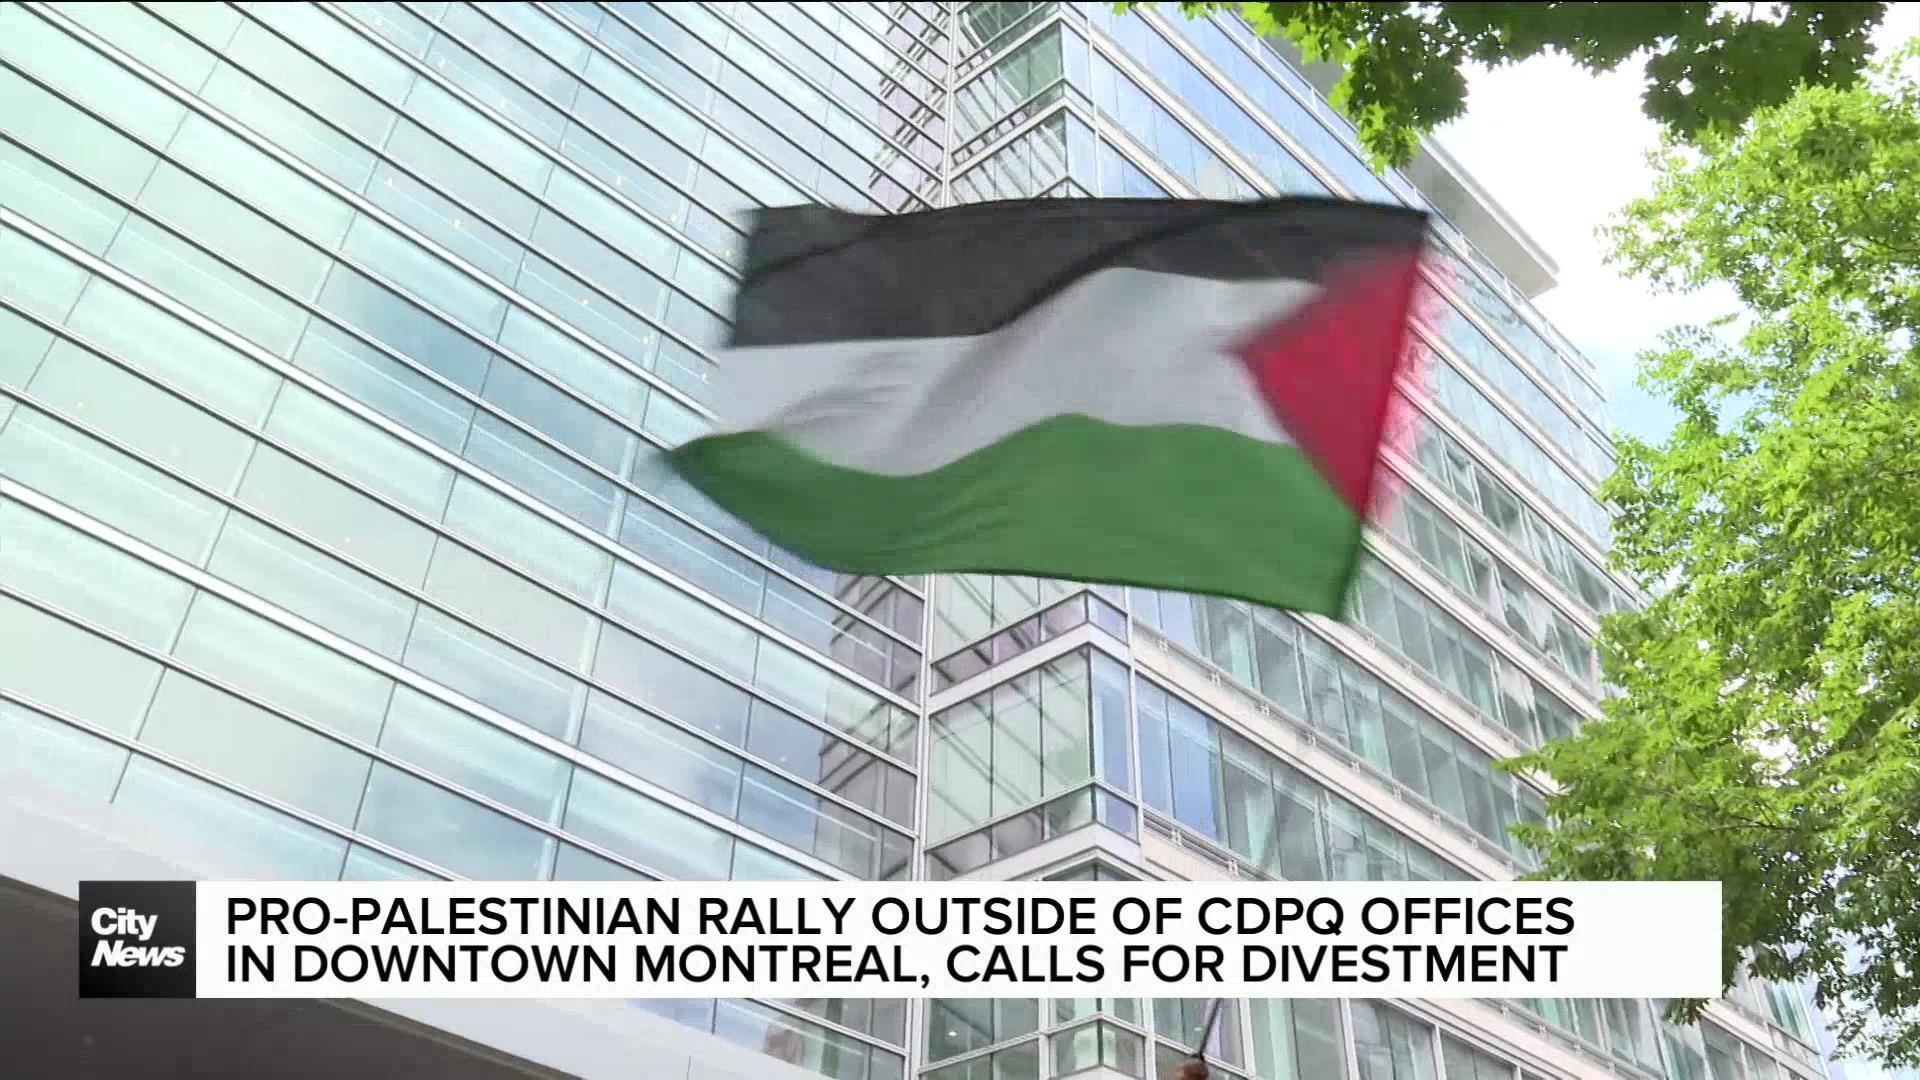 Pro-Palestinian rally outside of CDPQ offices in Montreal